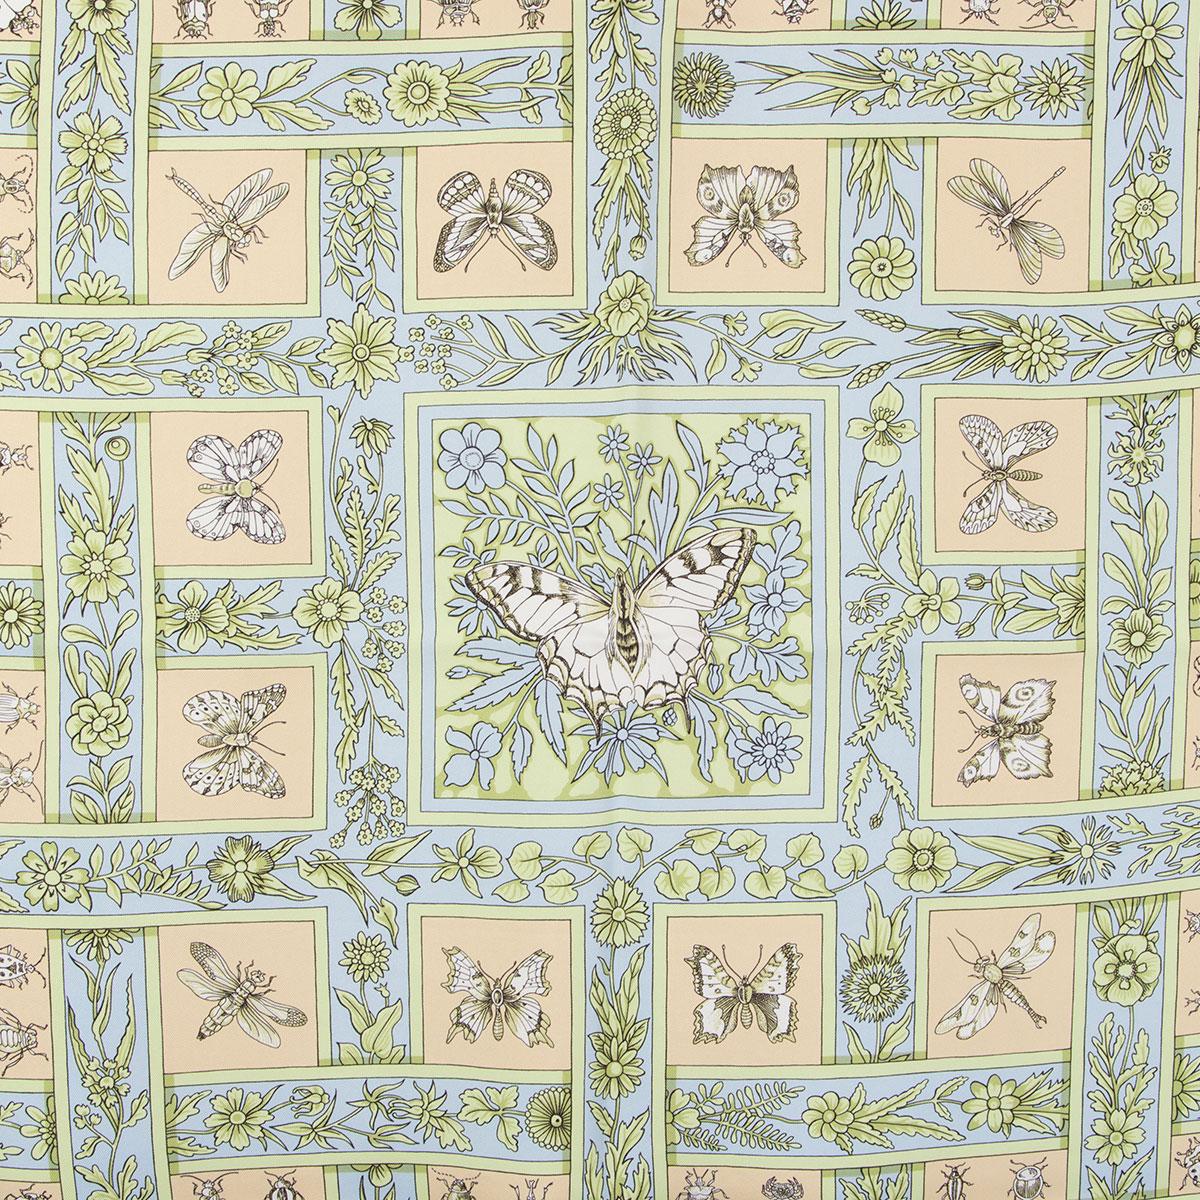 Hermes 'Joyaux d'Ete 90' scarf by Antoine de Jacquelot in beige silk twill (100%) with details in light blue and pistachio. Has been worn and is in excellent condition.

Width 90cm (35.1in)
Height 90cm (35.1in)